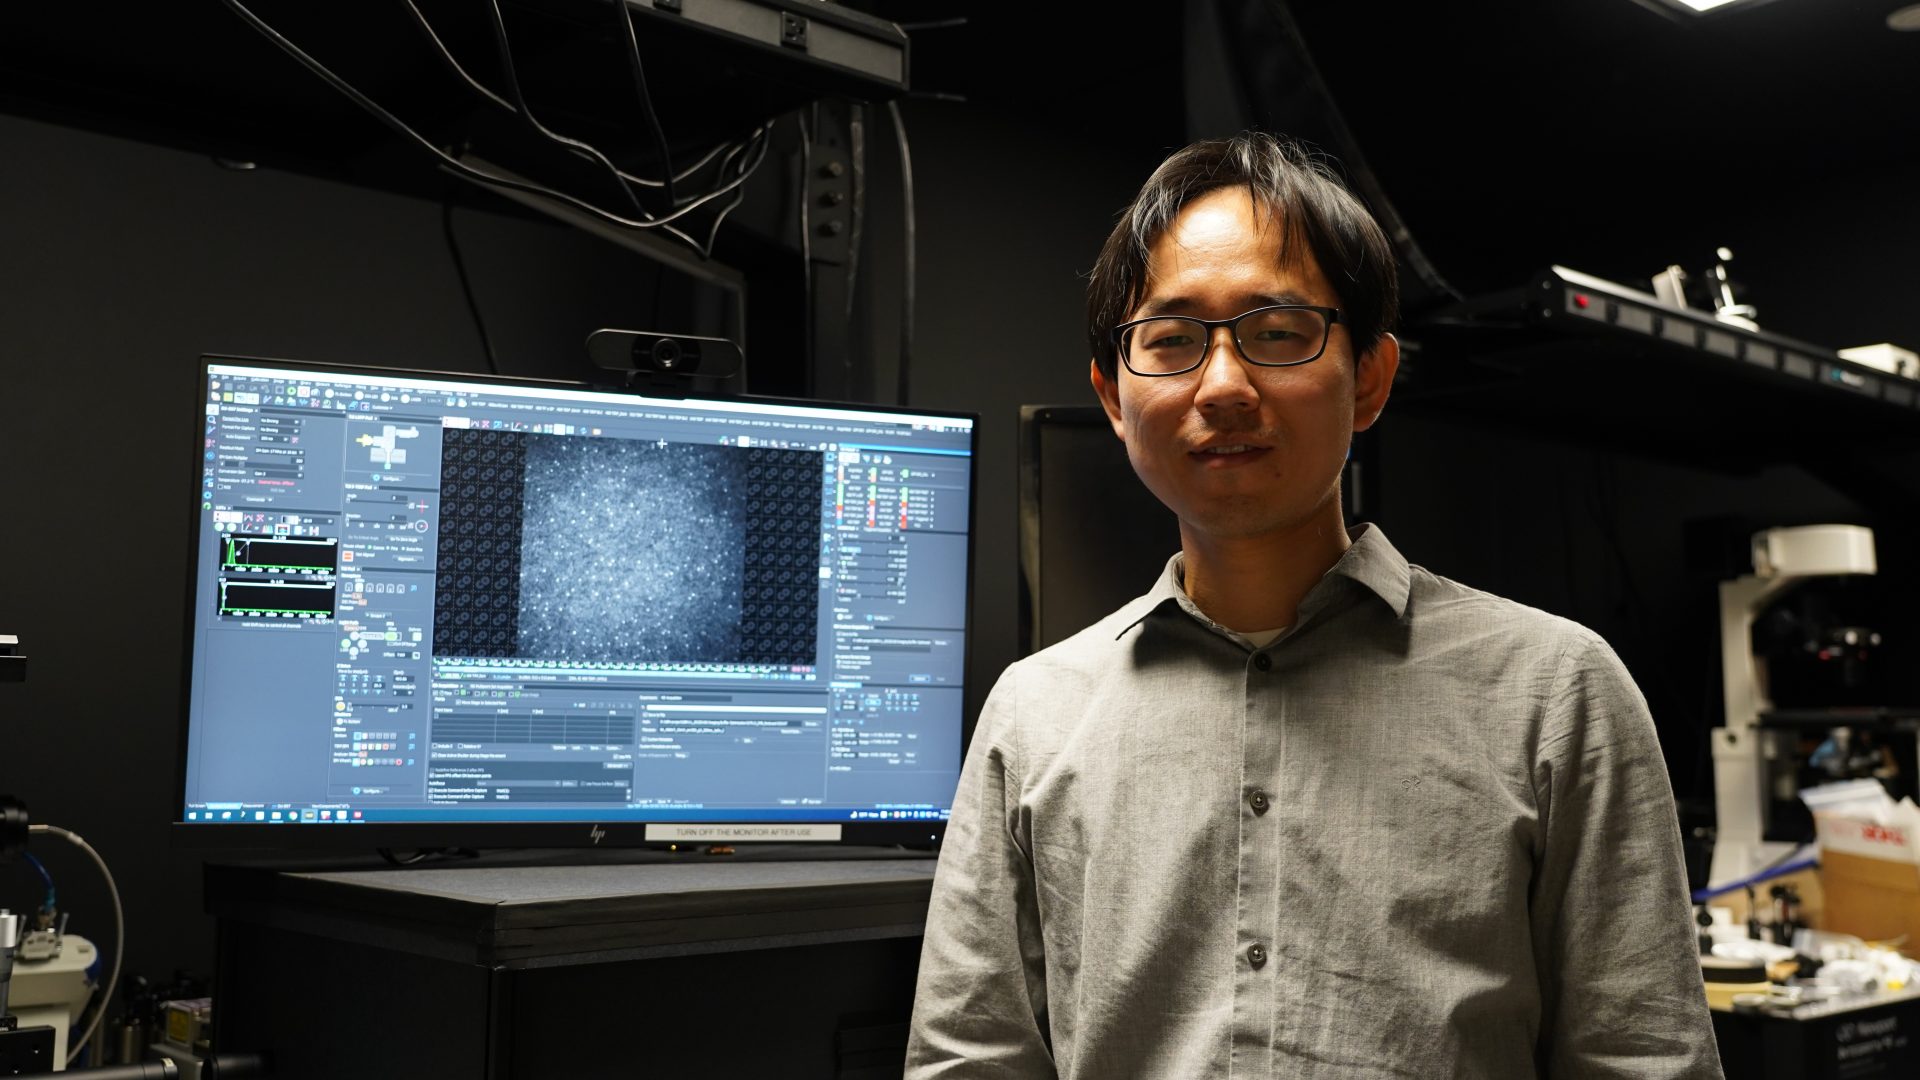 Lee stands in his lab, smiling at the camera, with a computer screen visible in the background.